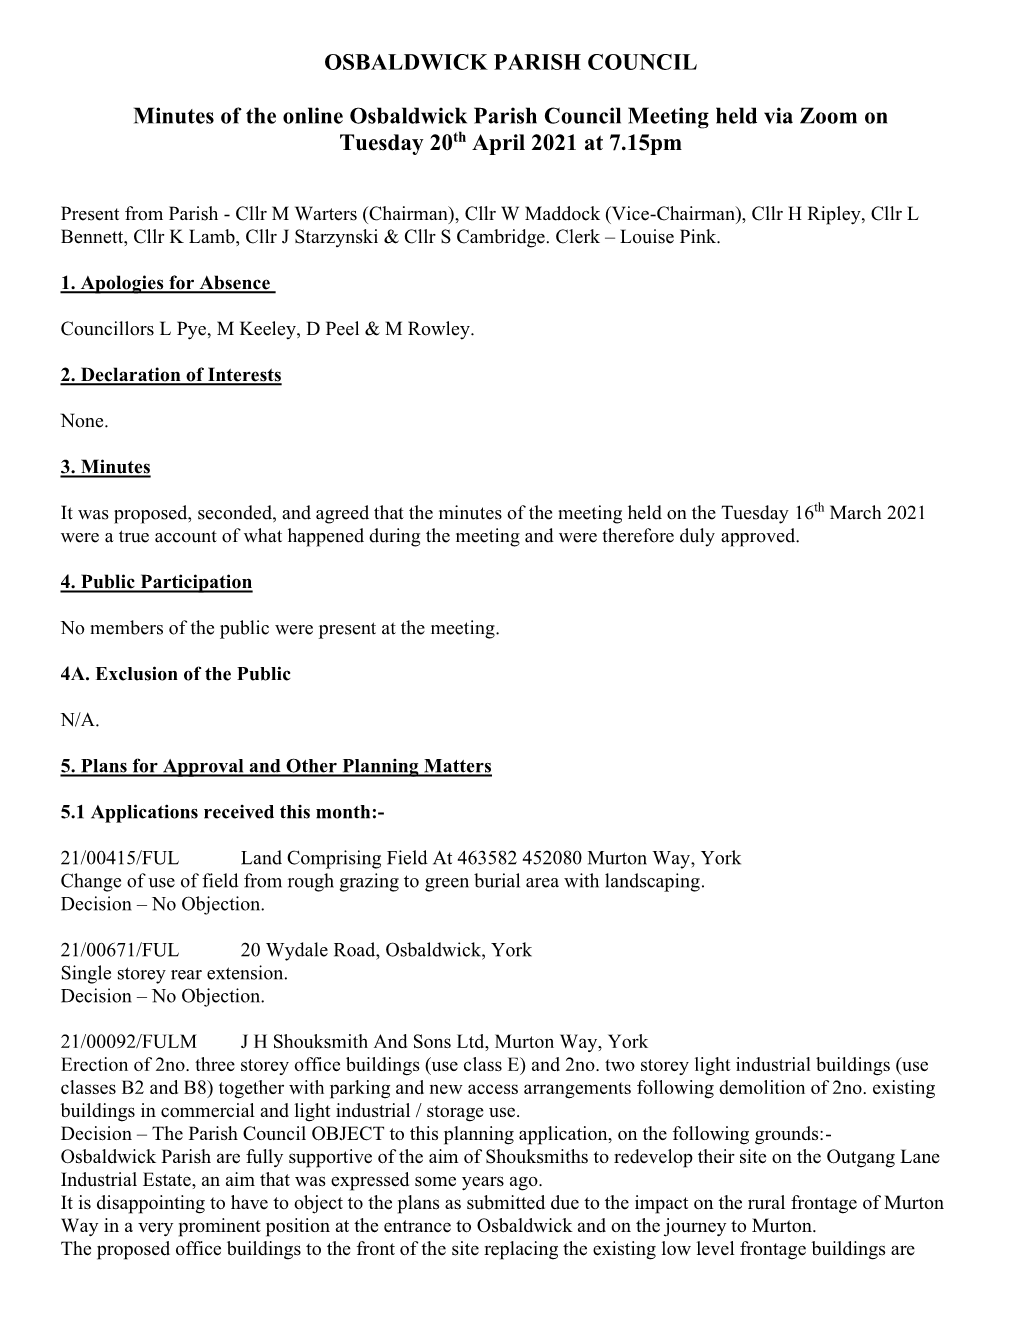 OSBALDWICK PARISH COUNCIL Minutes of the Online Osbaldwick Parish Council Meeting Held Via Zoom on Tuesday 20Th April 2021 at 7